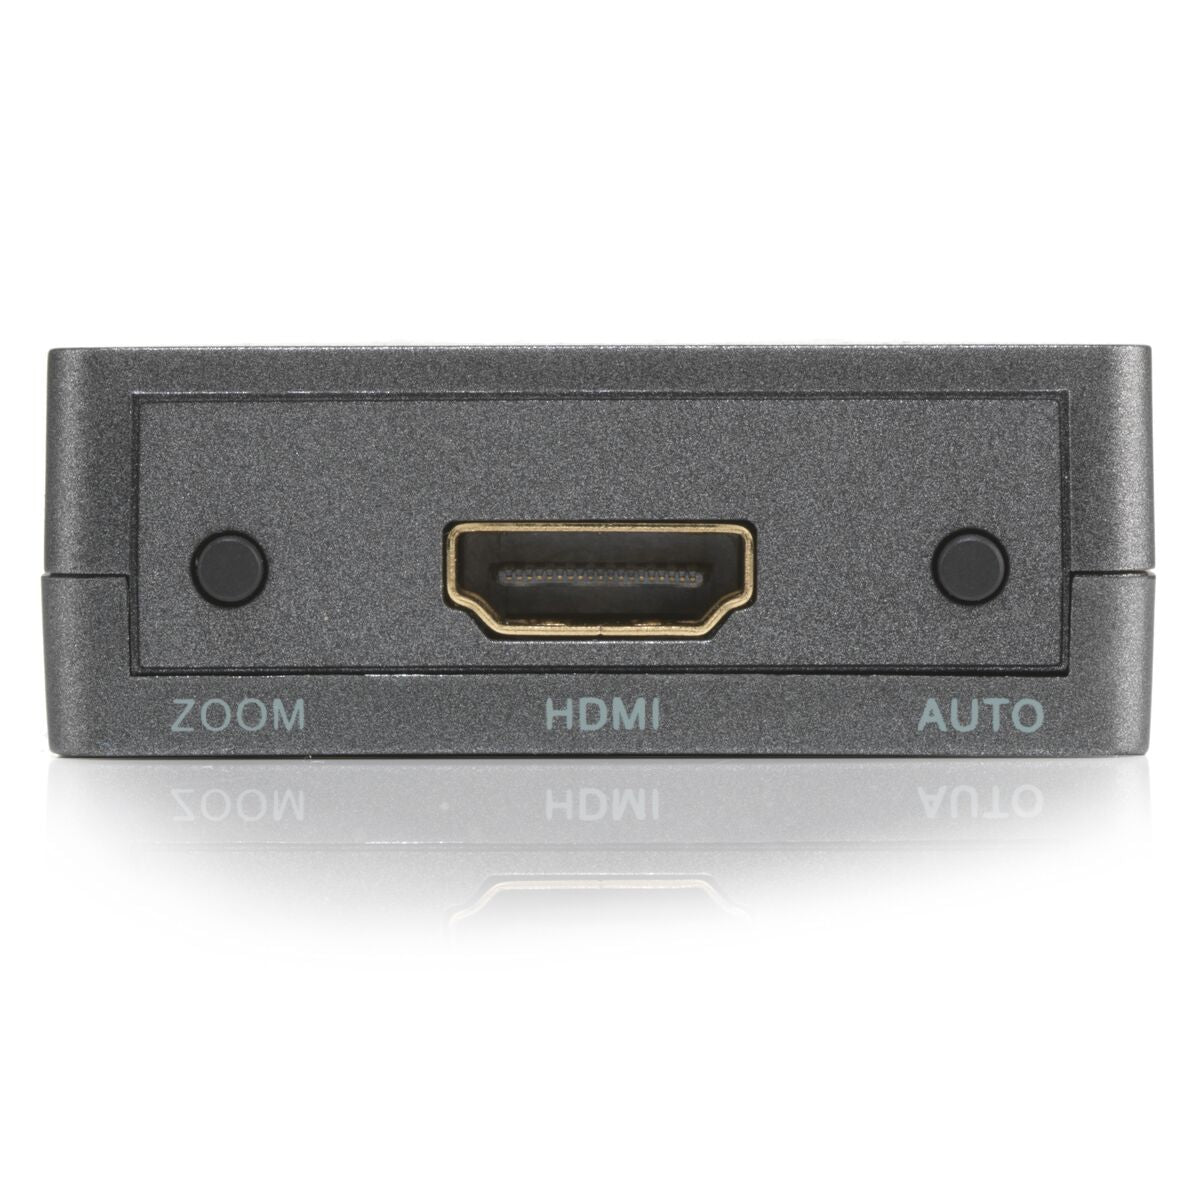 Connect VH51 - VGA to HDMI adapter - HDMI Output Connection Image | Marmitek